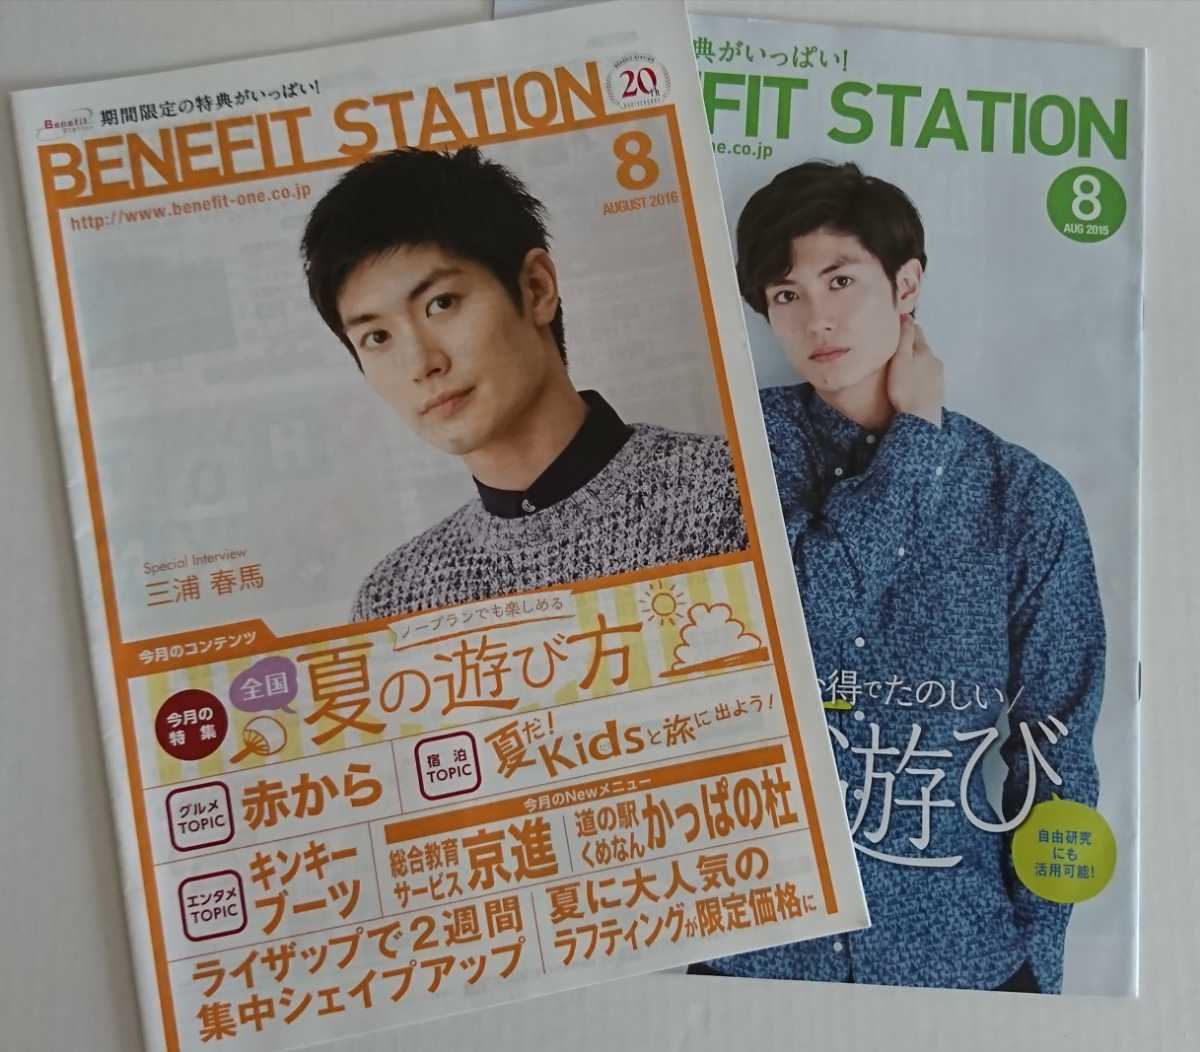 ** three . spring horse cover inter view chronicle . have bene Fit station 2 pcs. set 2015 2016 BENEFIT STATION**